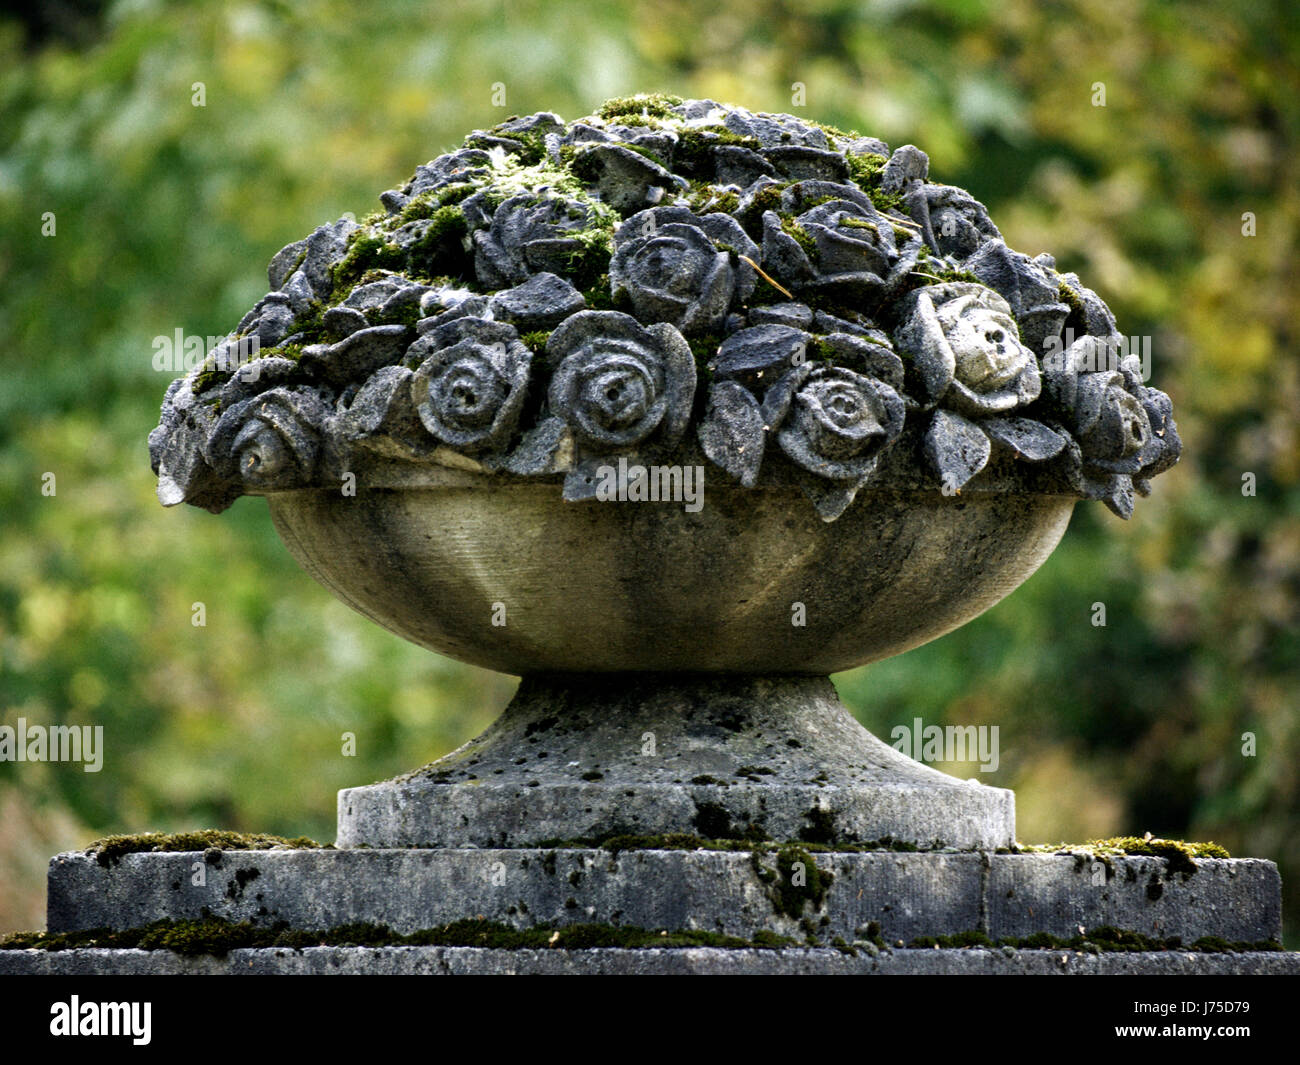 flower rose plant vessel moss container bowl object religious flower rose plant Stock Photo